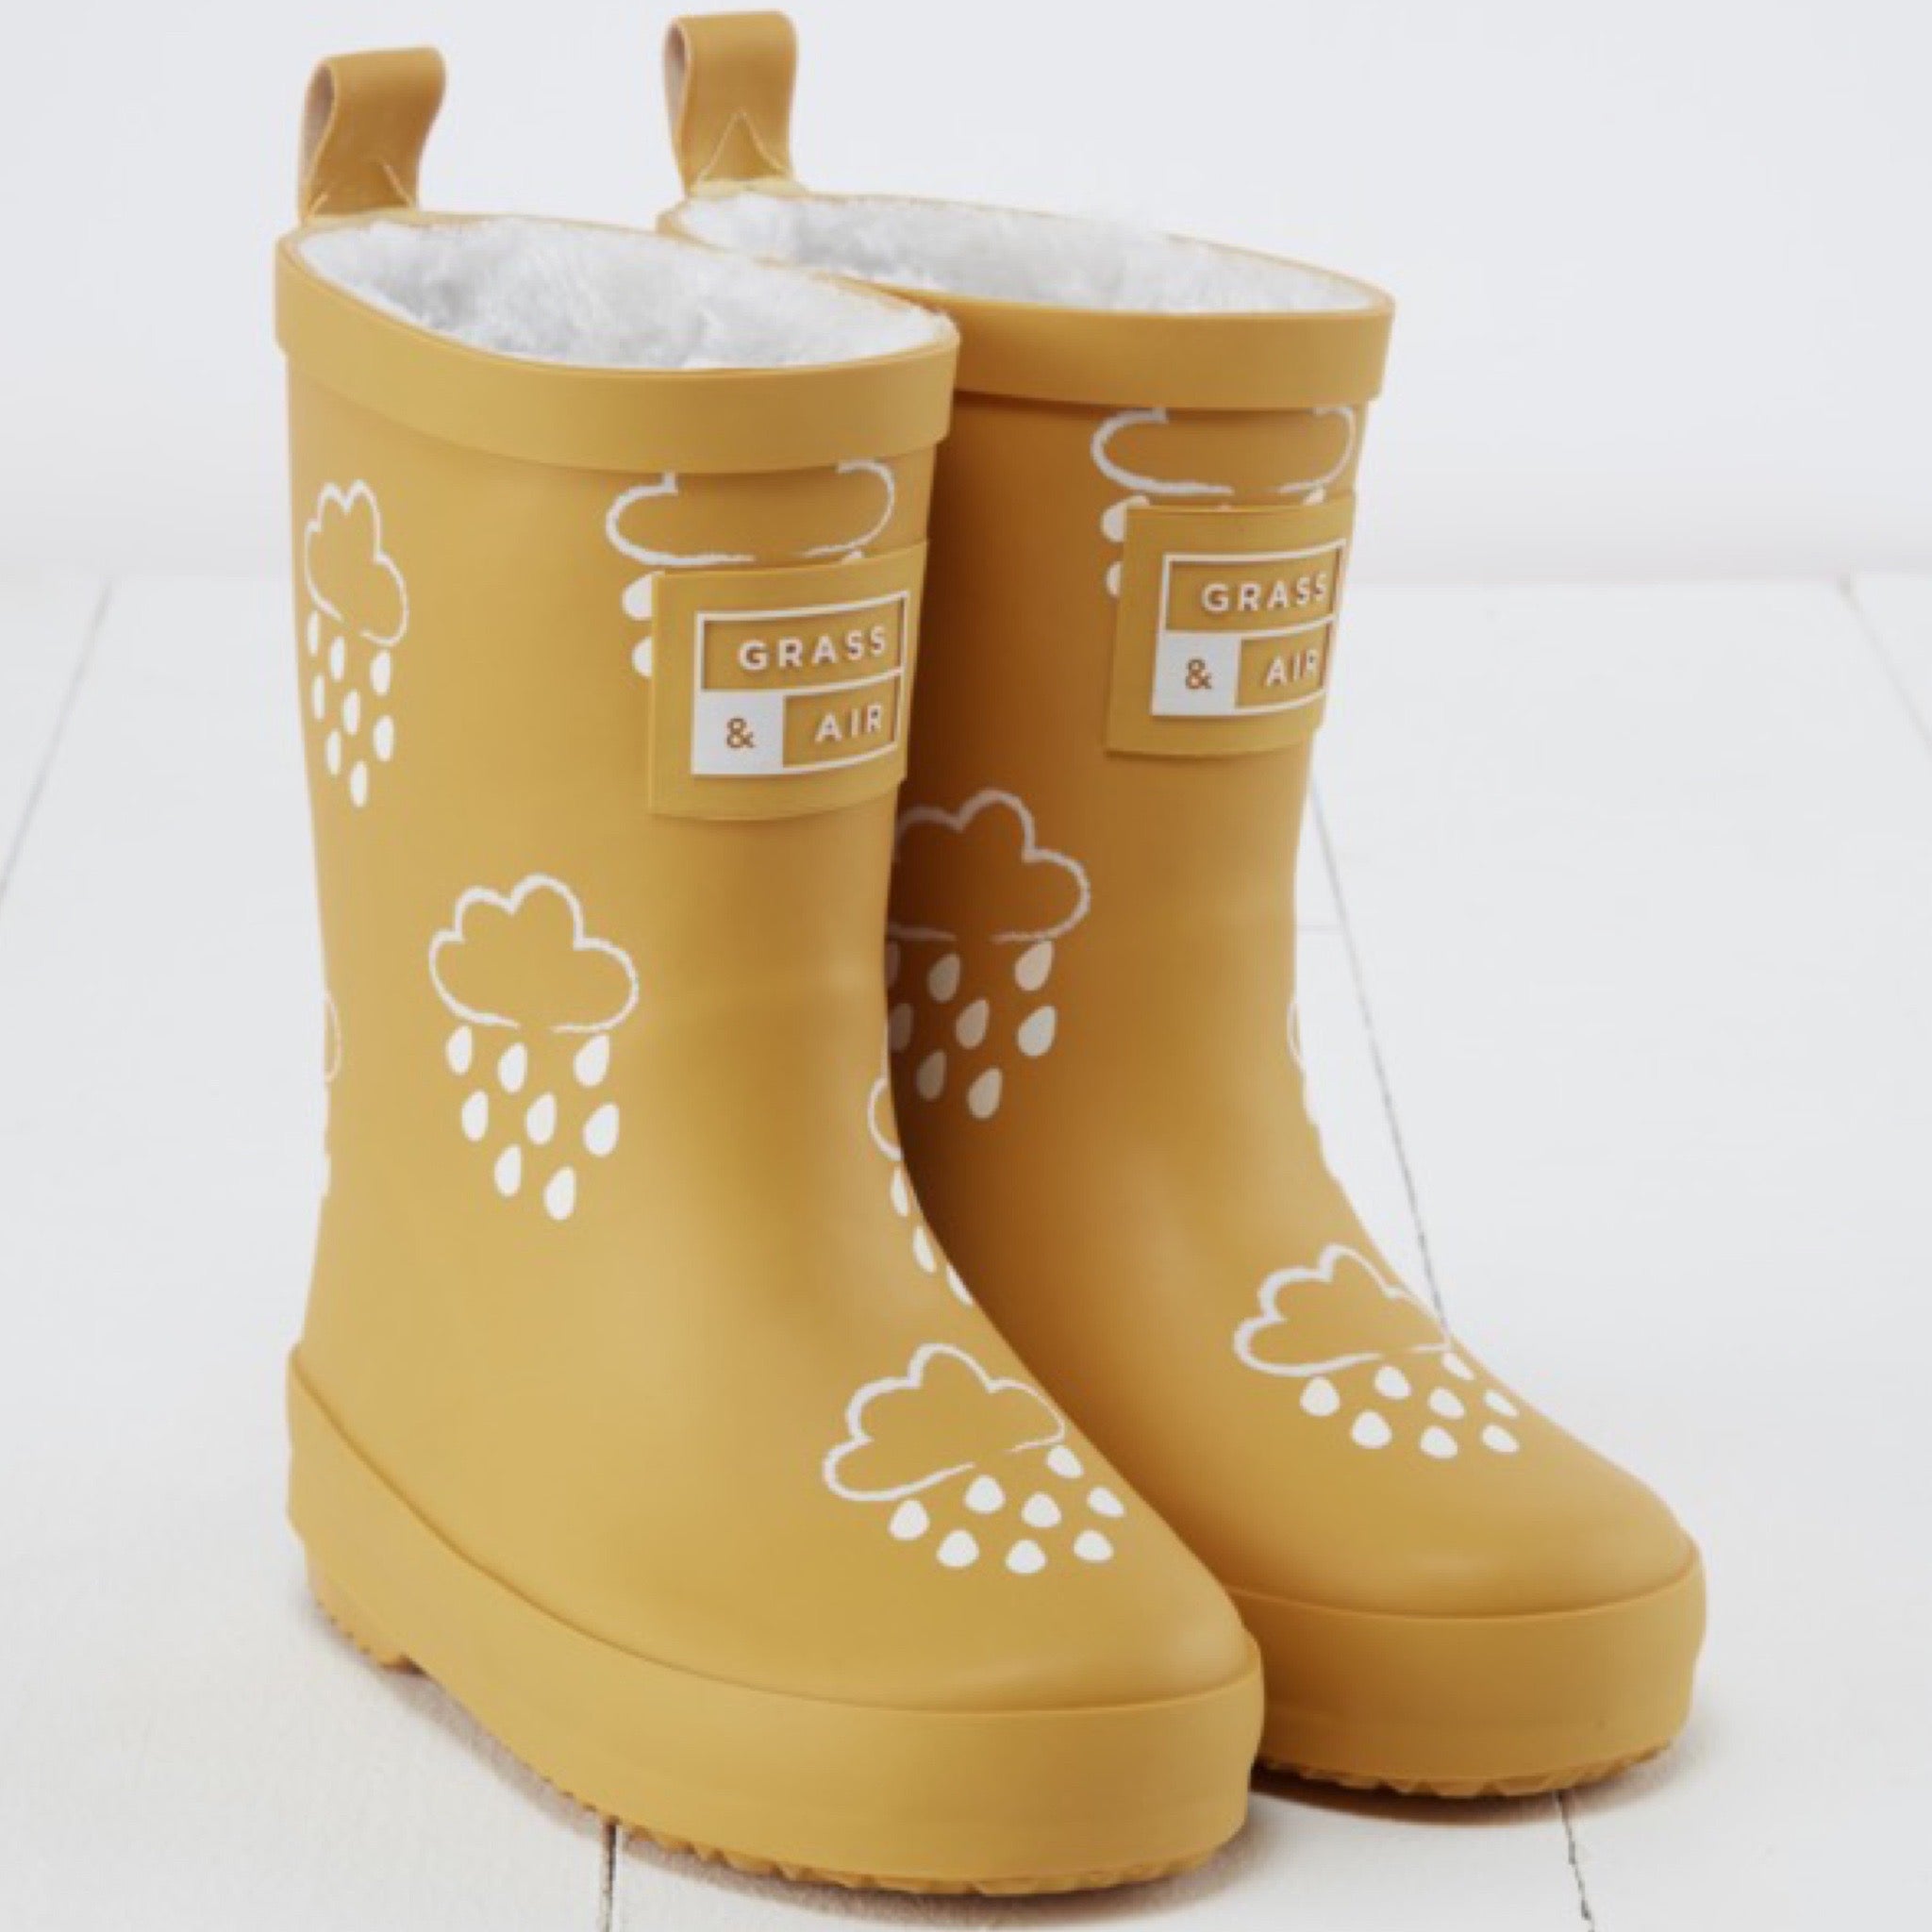 Ocher colored winter rubber boots with color changing